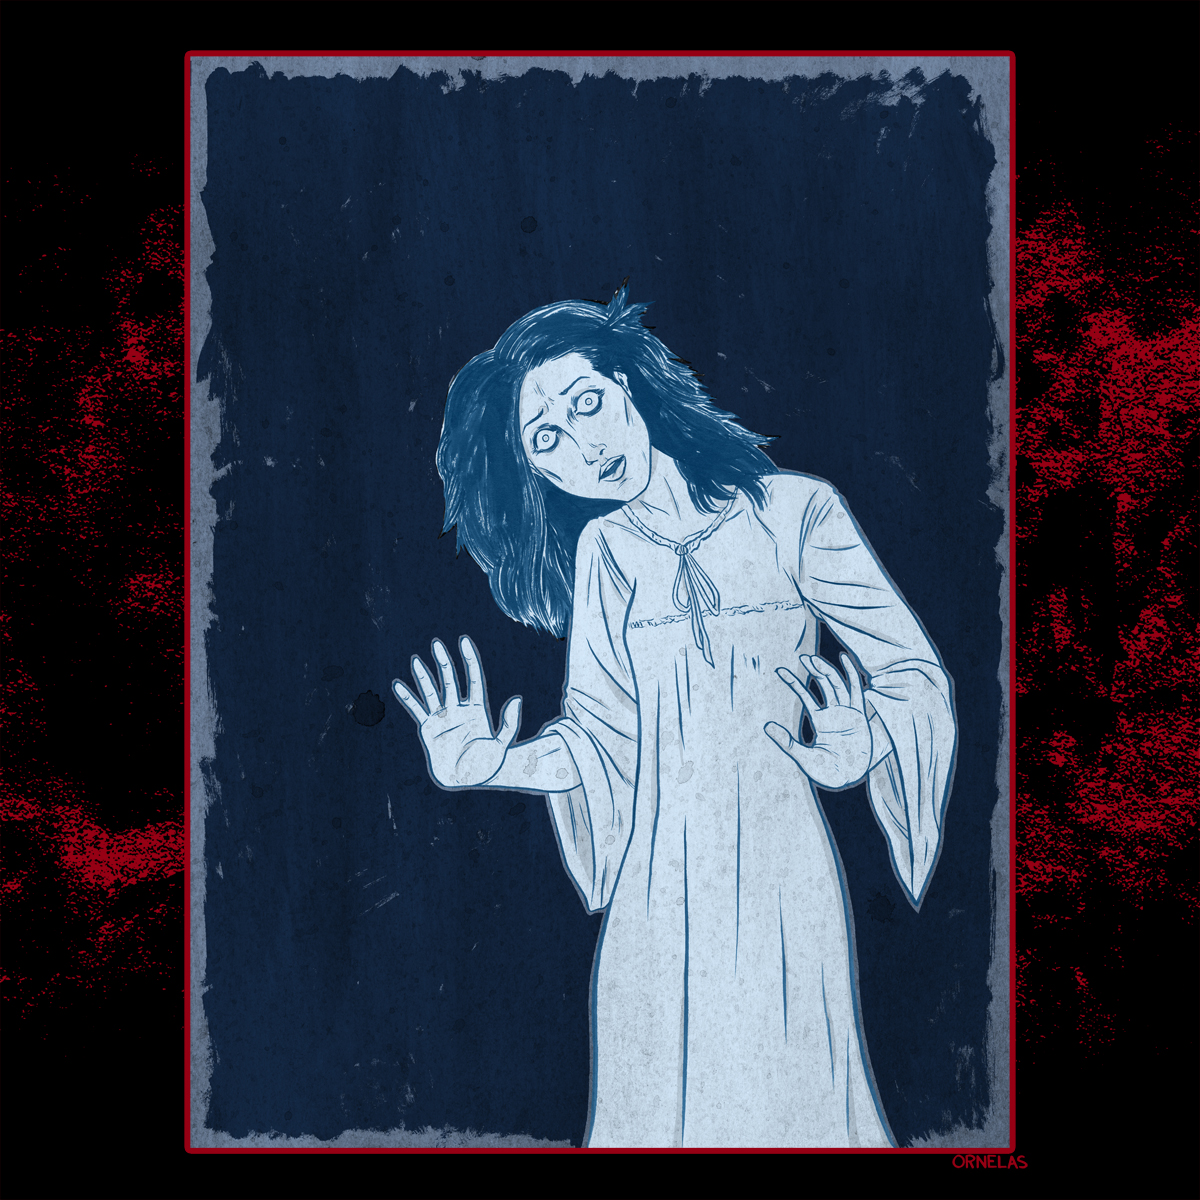 A ghost from The Empty House (Algernon Blackwood) for Day 20 of #31daysofhalloween
#BuyOrnelasArt #algernonblackwood
#theemptyhouse #ghost
#commissionsopen #artforsale
#ghoststories
#supportlocalartists #shopsmall #mixedmedia #horrormovies #horrorart #horrorcommunity #horrormonth